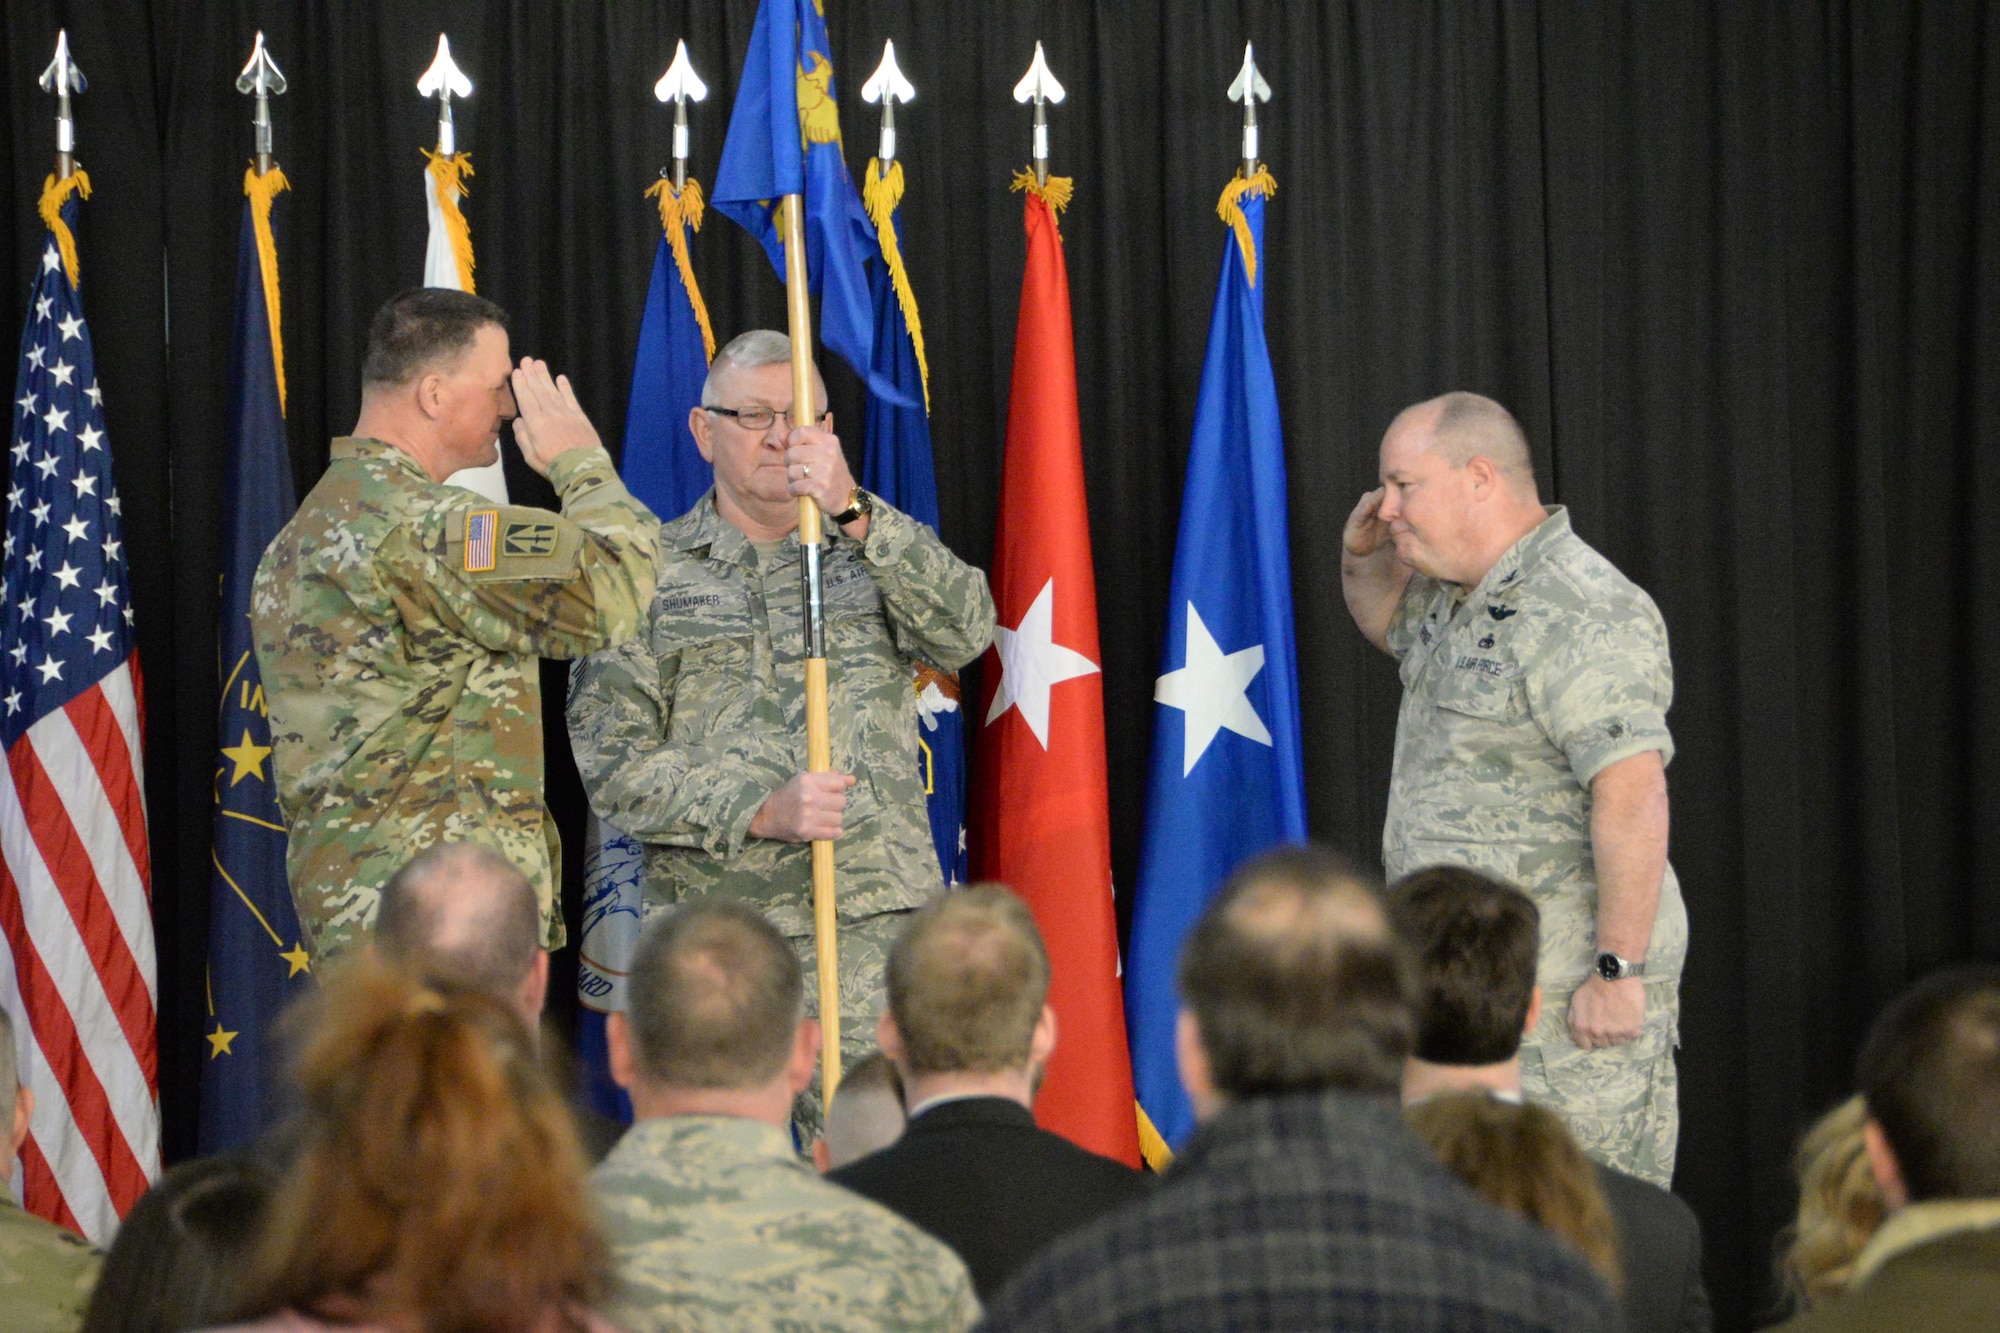 U.S. Air Force Col. Chris Alderdice, right, newly appointed commander of the 181st Intelligence Wing, salutes the Adjutant General of Indiana Maj. Gen. Courtney P. Carr, left, during an assumption of command ceremony, Feb. 4, 2017, at Hulman Field Air National Guard Base, Terre Haute, Ind. (U.S. Air National Guard photo by Senior Airman Kevin D. Schulze)